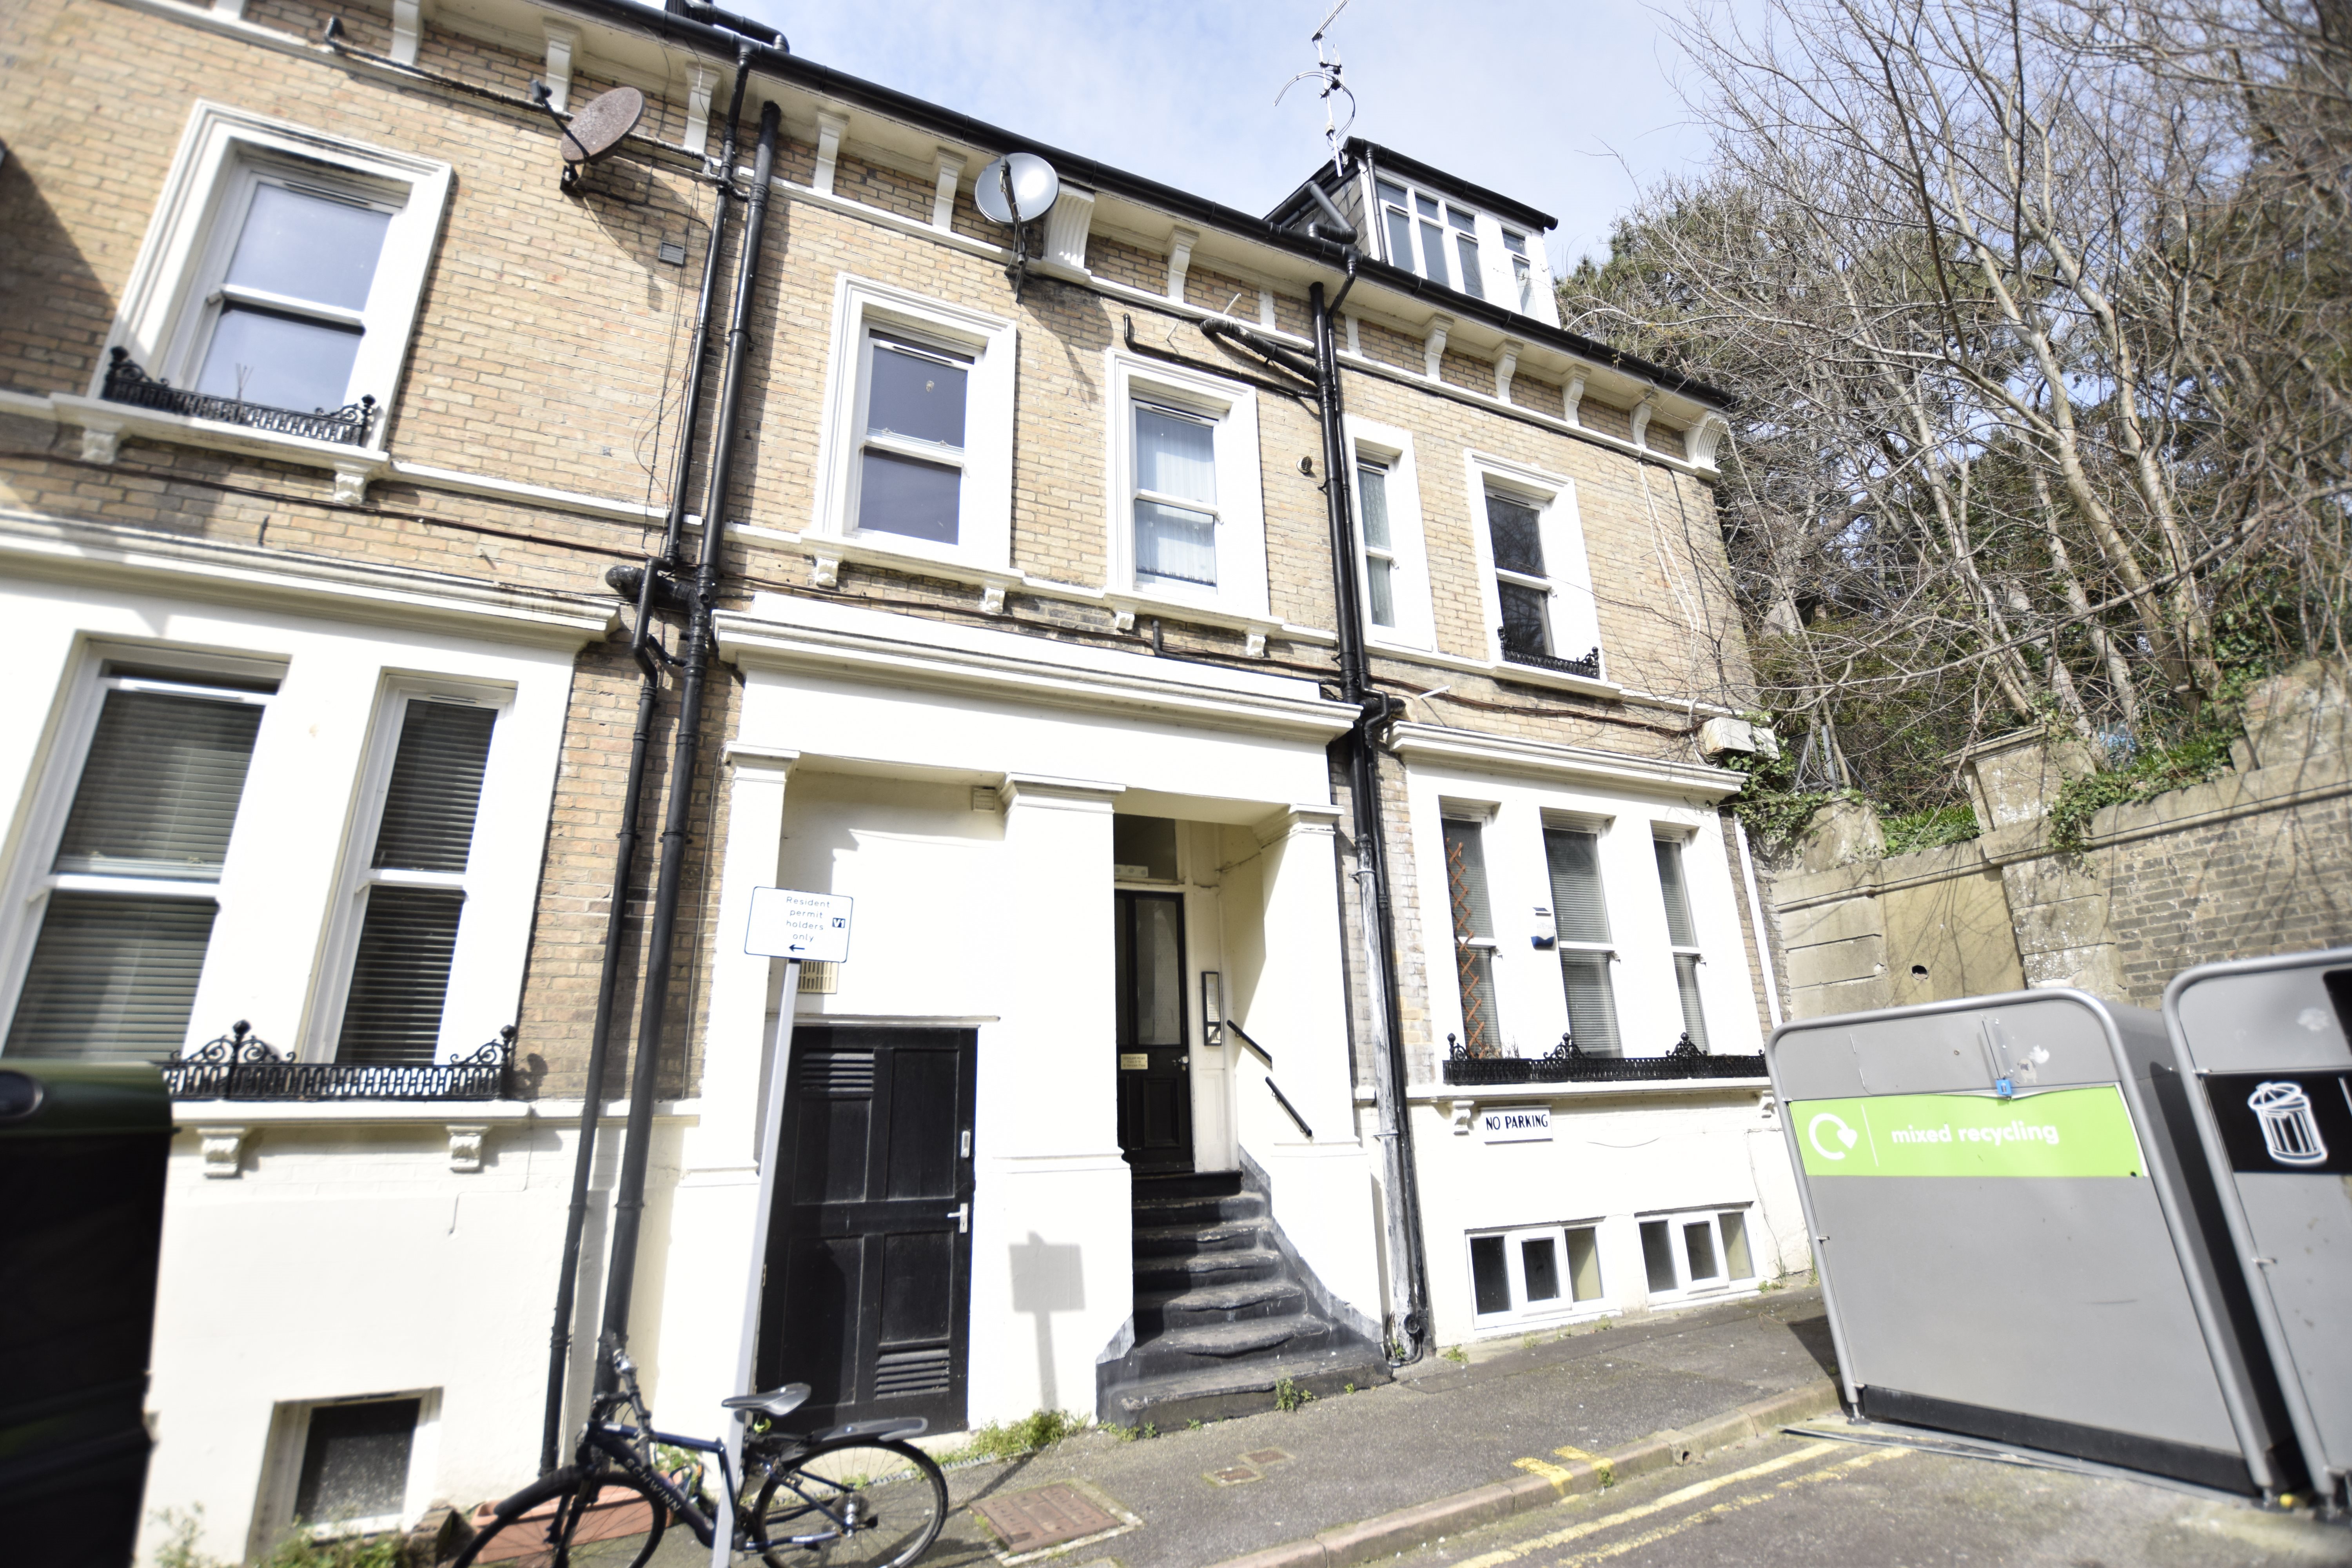 1 bed flat for sale in 11-12 Verulam Place, Bournemouth - Property Image 1